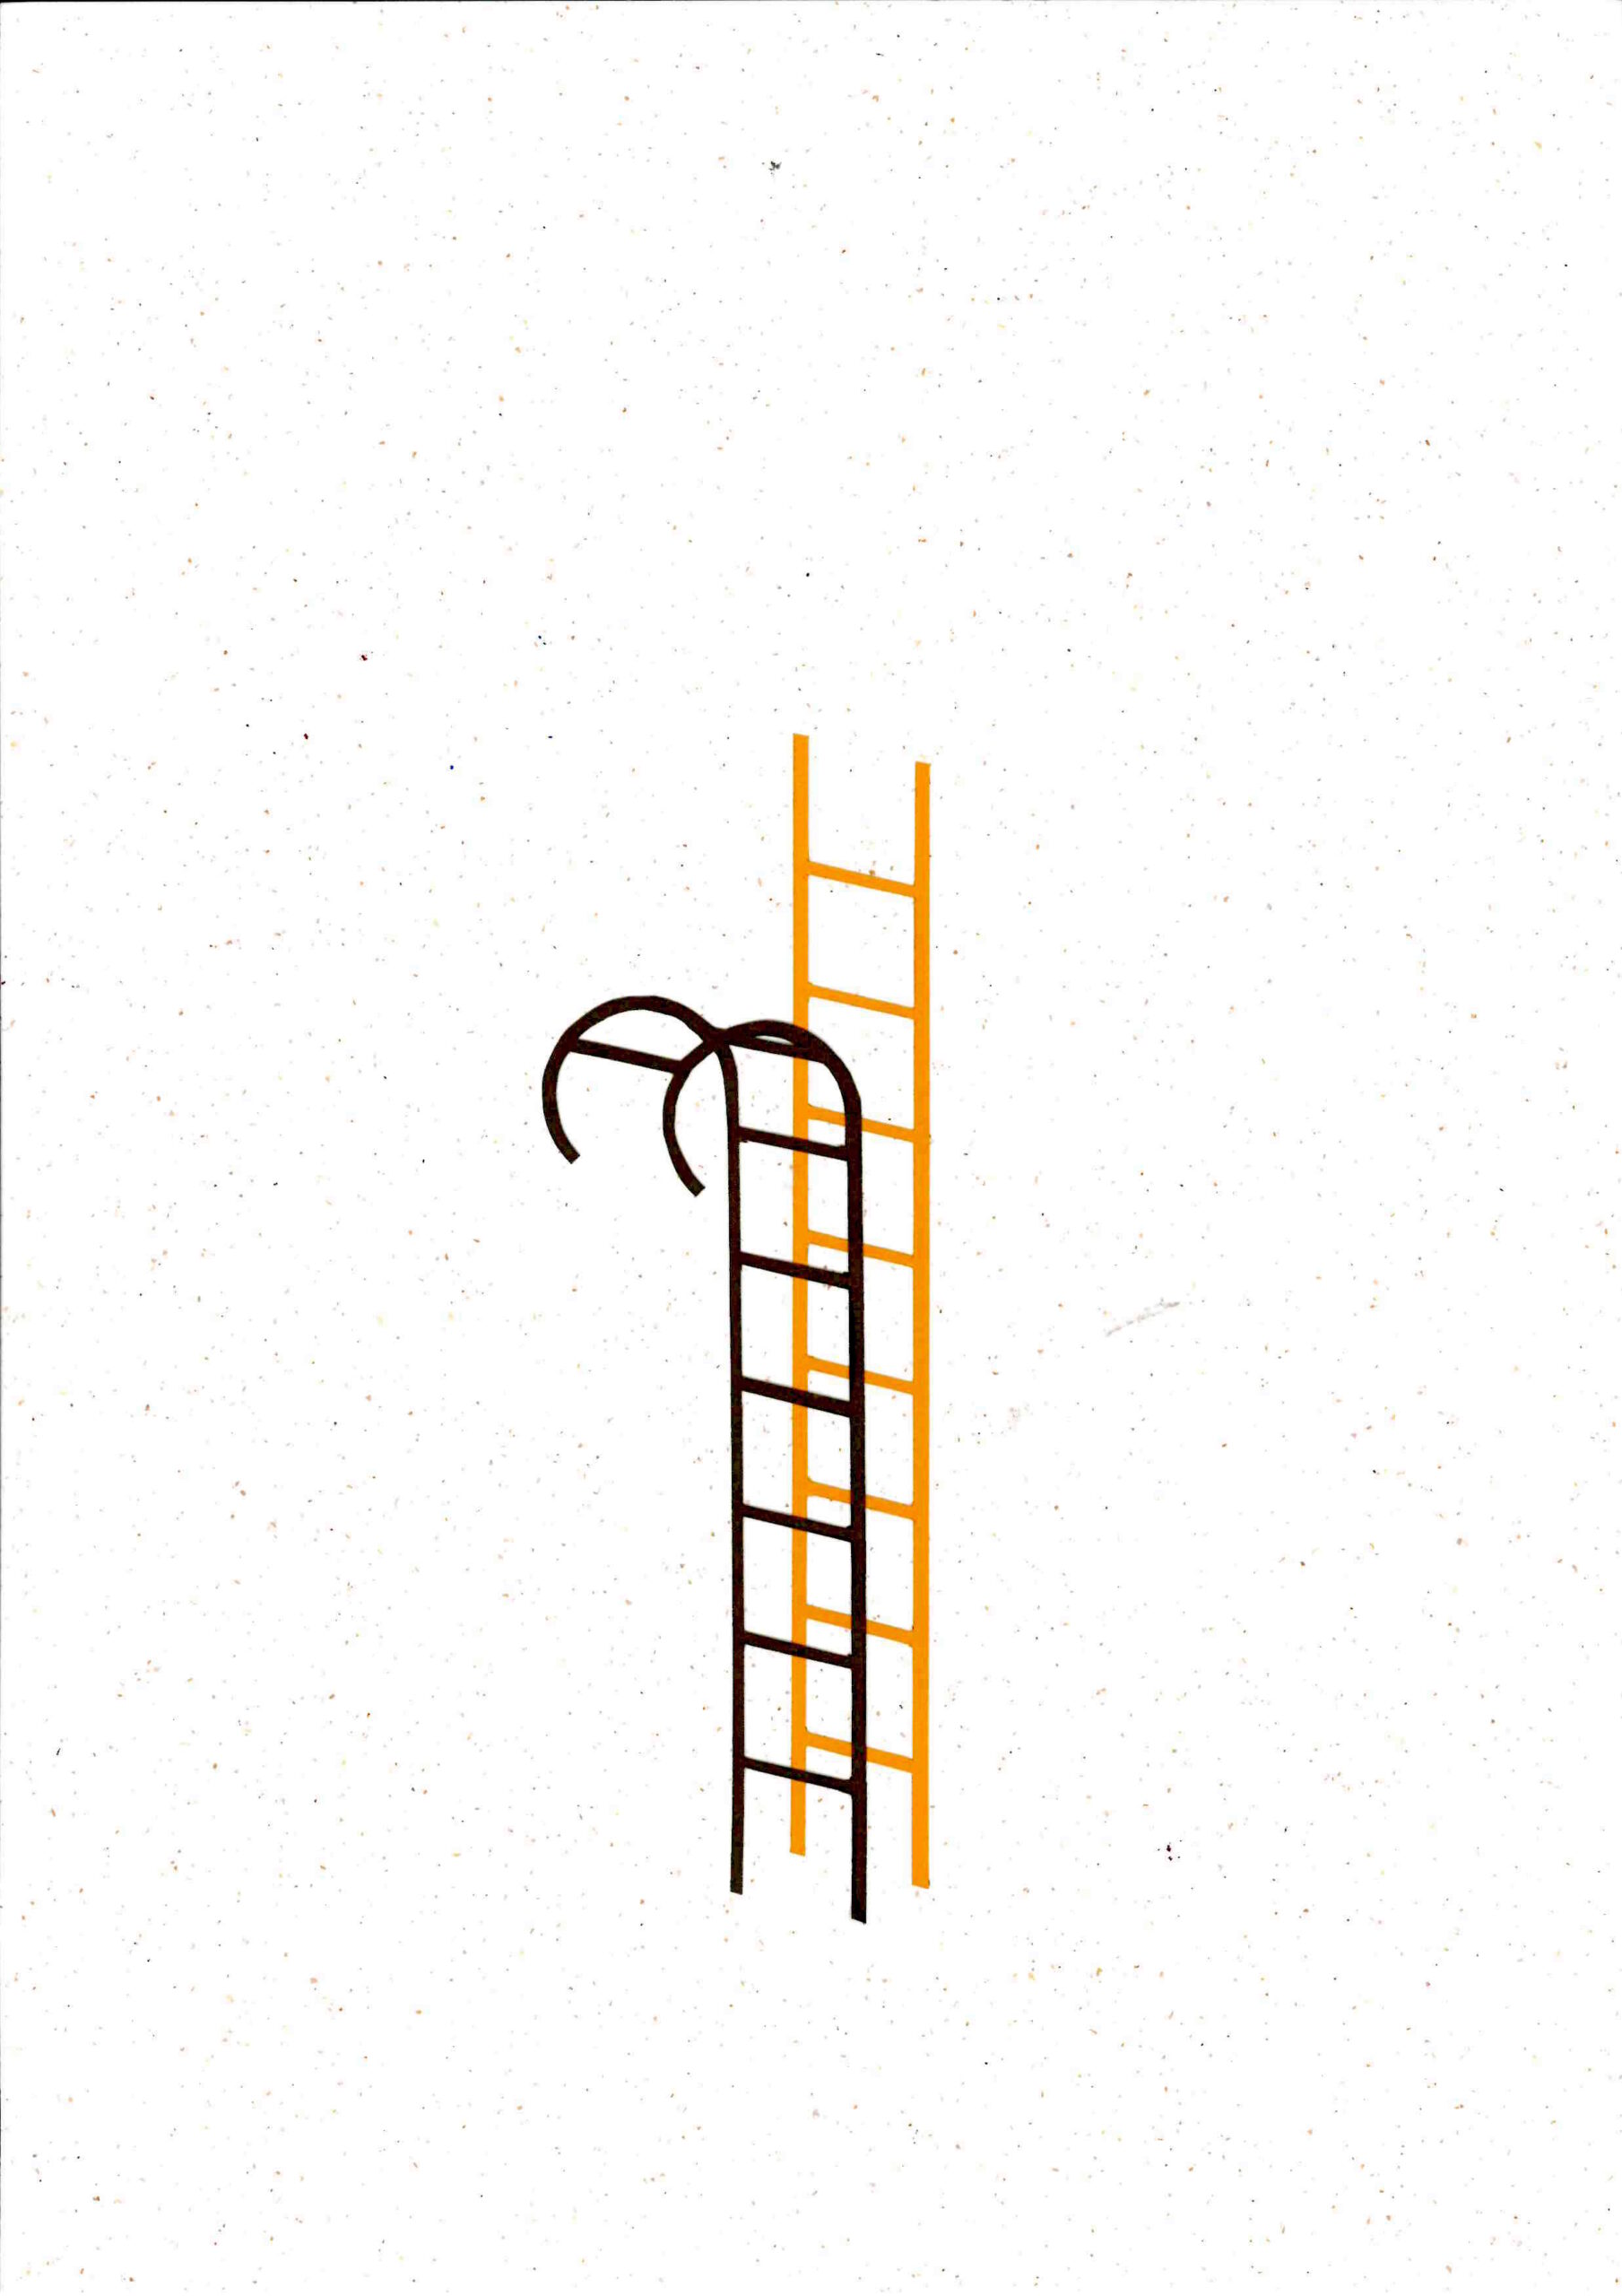 ‘Intimate Ladder’ is part of an ongoing series of ladders made using recycled paper. Over the course of Lathwood’s practice, ladders have been an important symbol of change, desire and aspiration. They are the quintessential tools to get over something, to conquer obstacles and shift a view point.